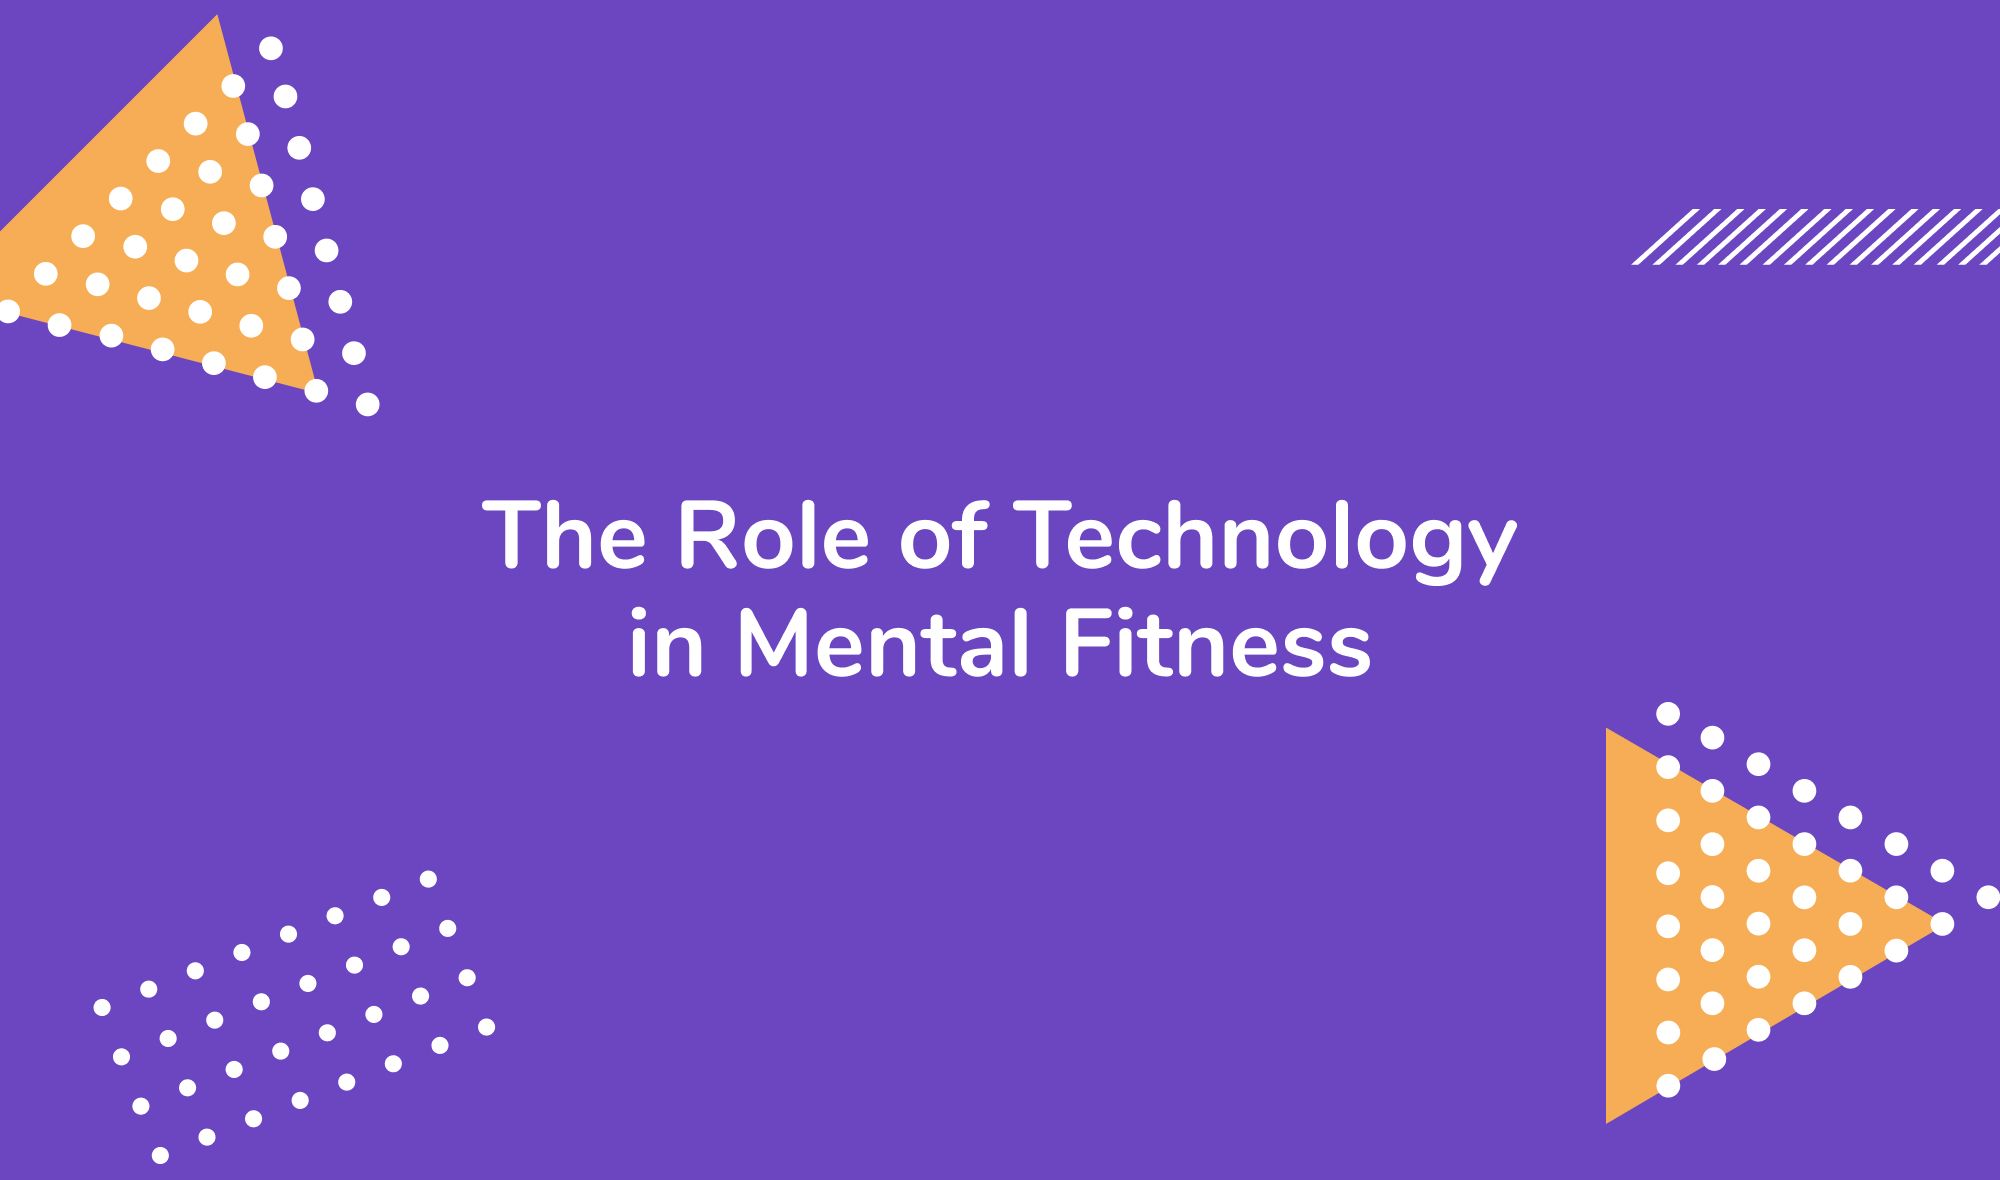 The Role of Technology and Digital Tools in Mental Fitness